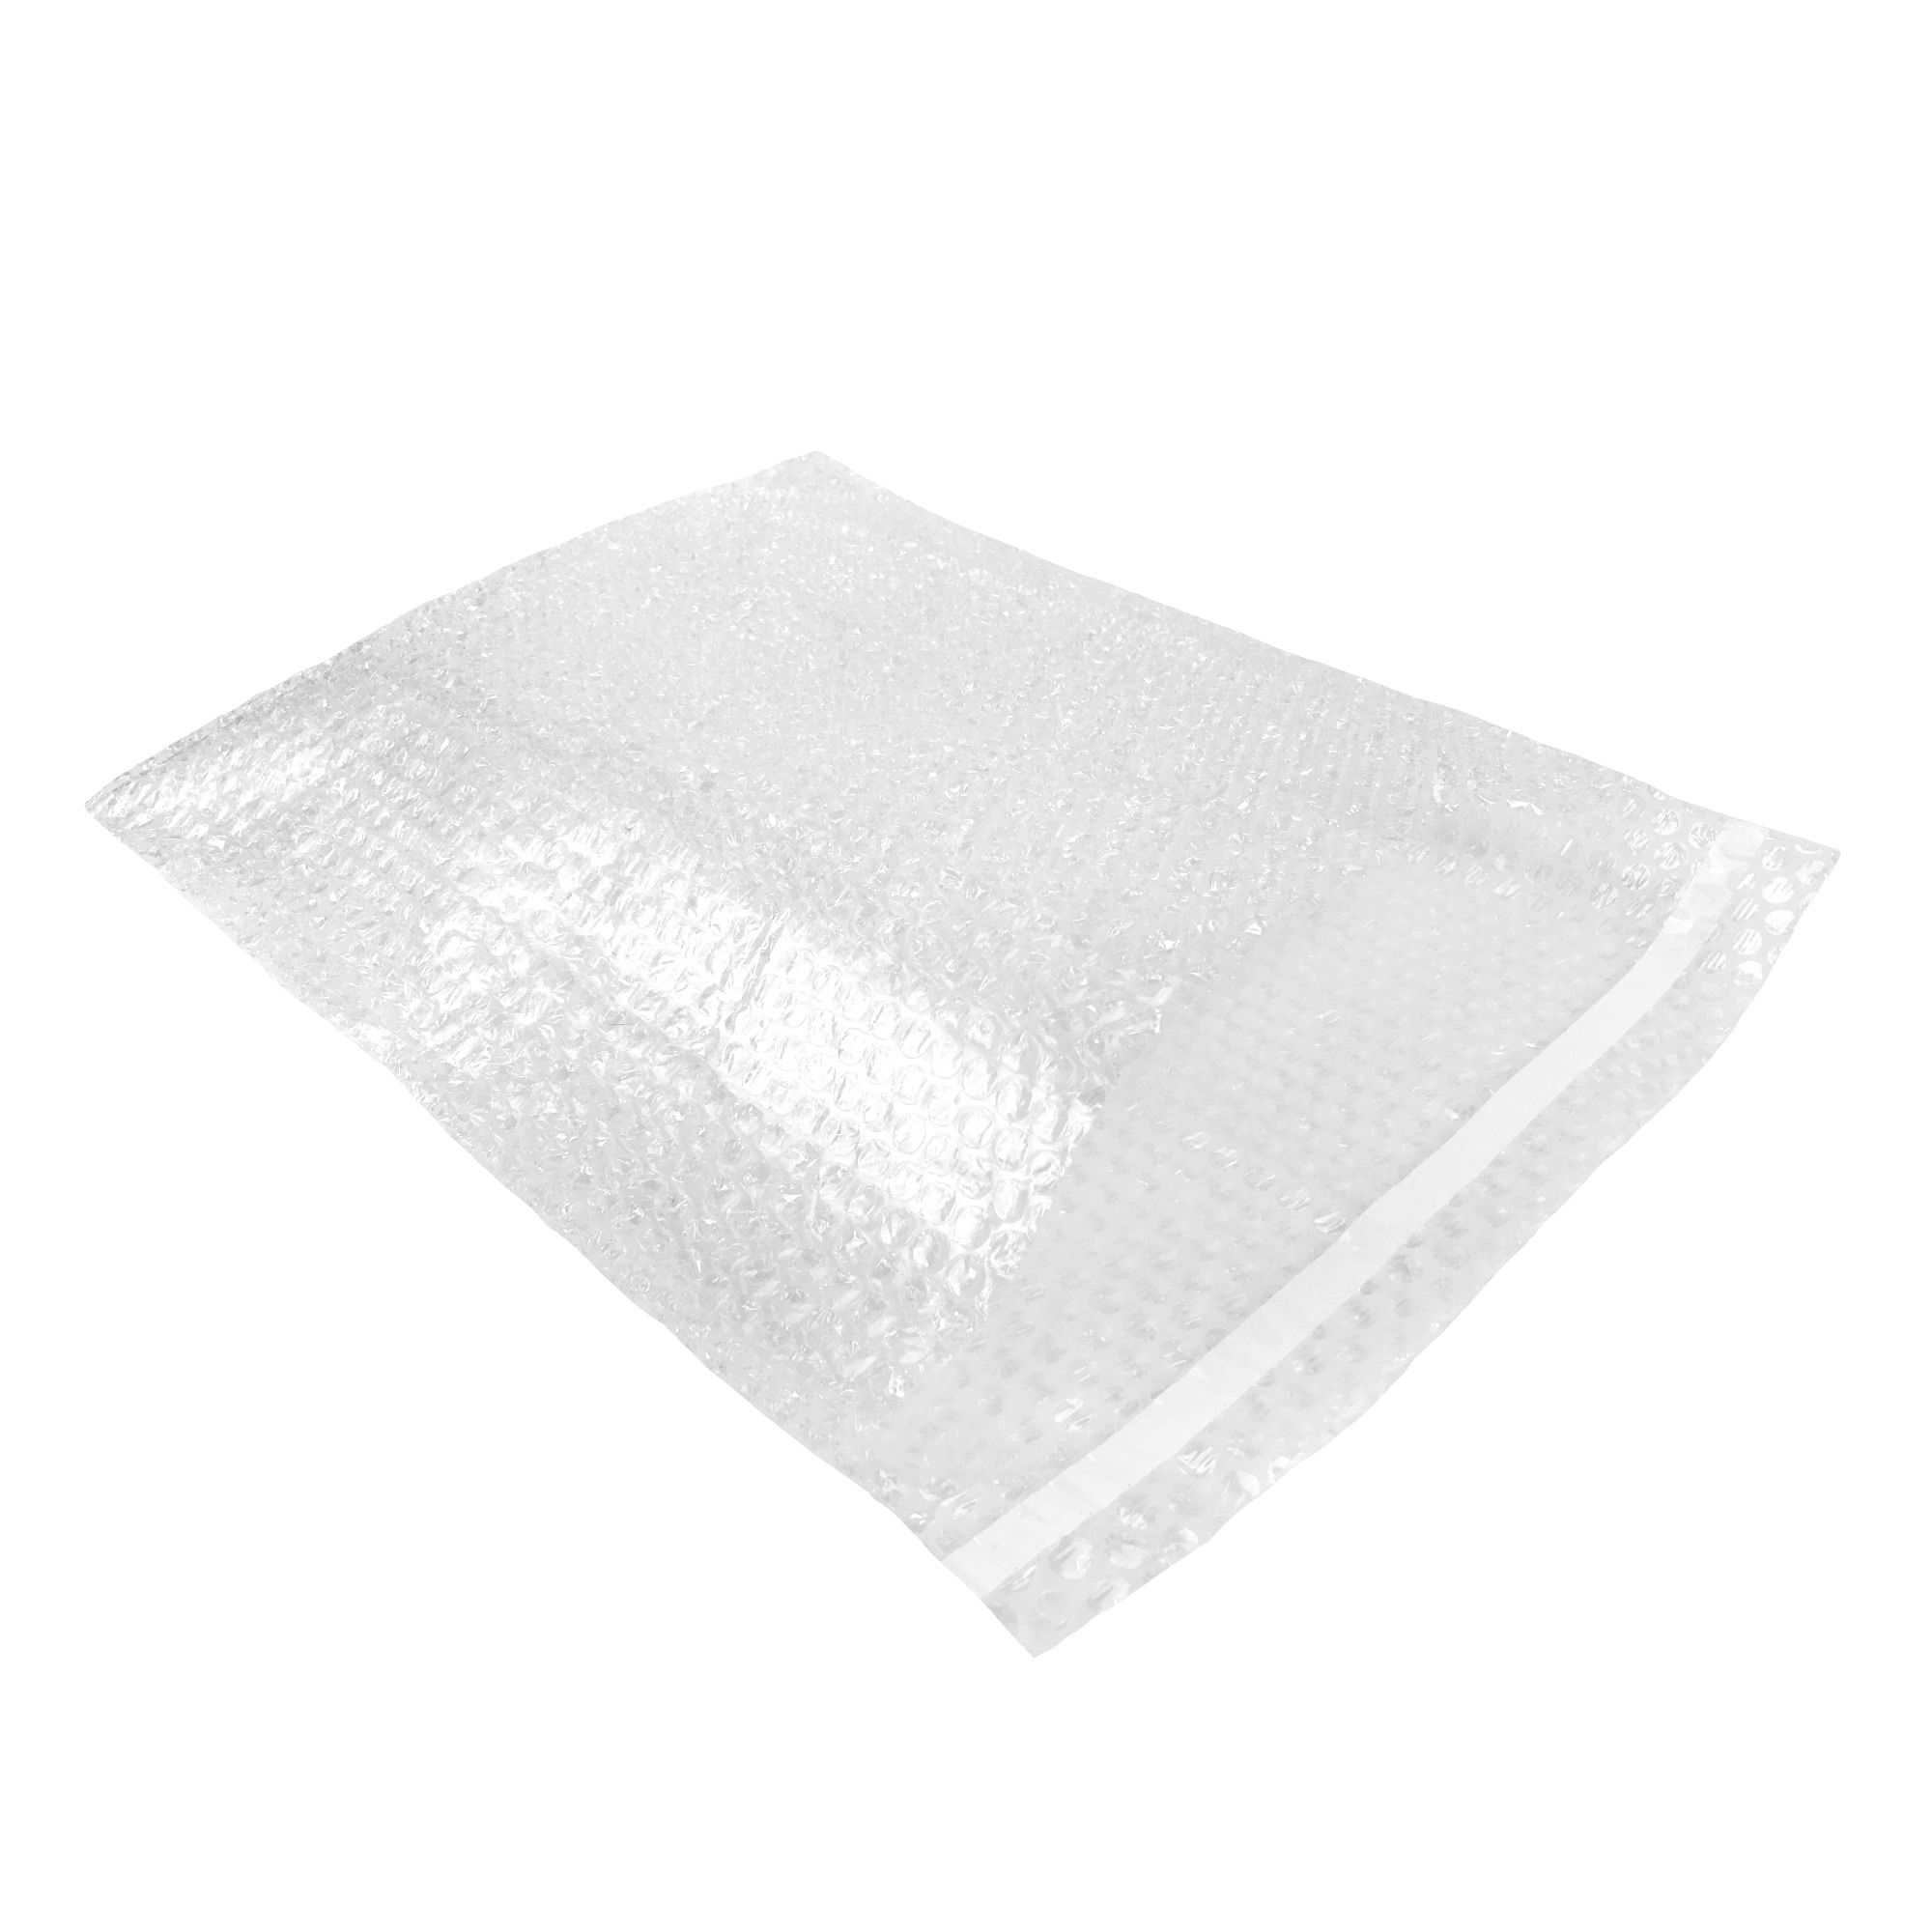 Bubble Cushion Wrap Bags Direct from the Factory Fast Free